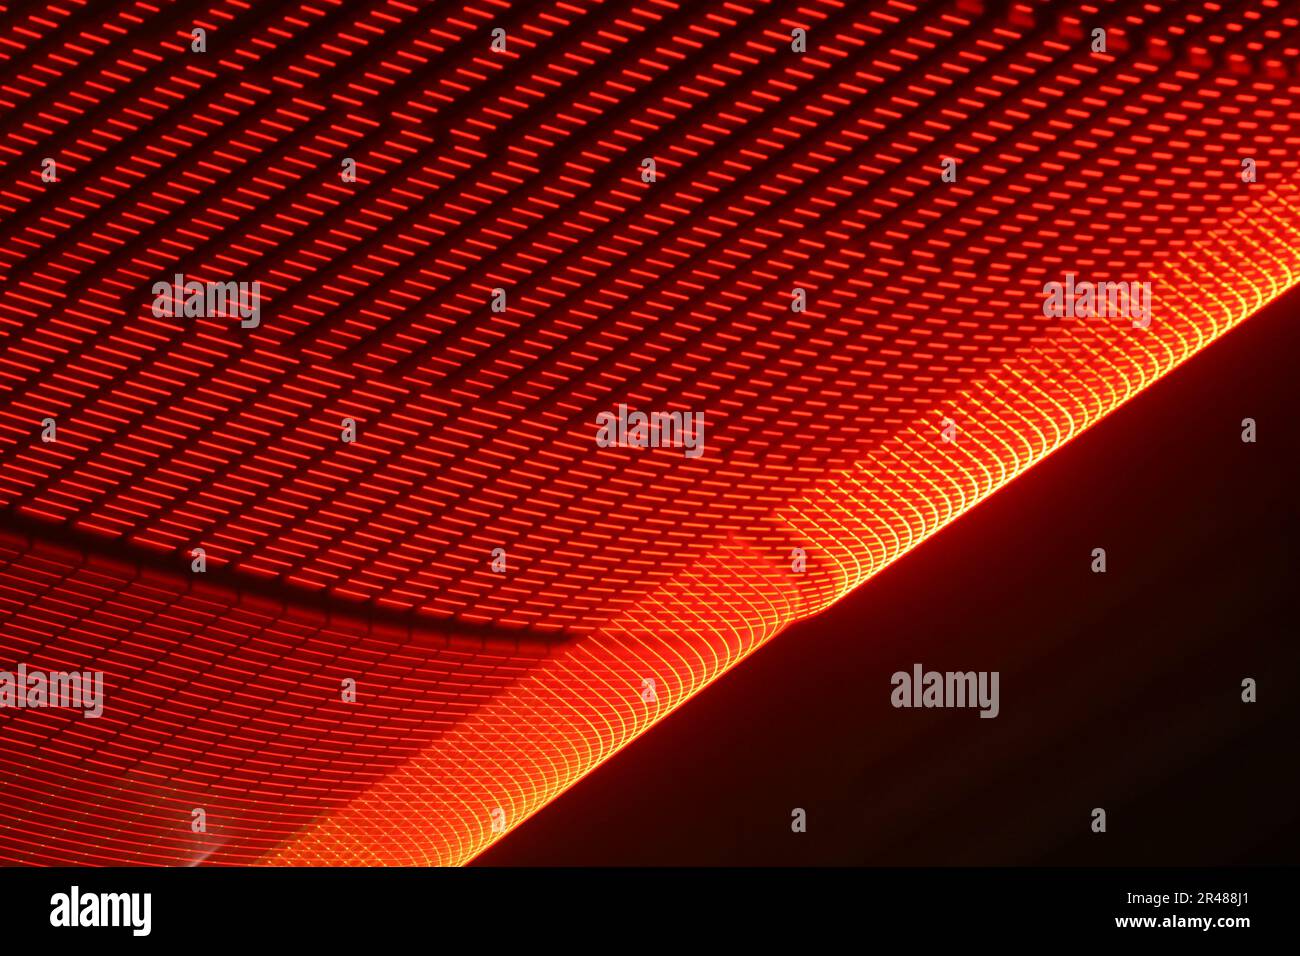 A large display featuring a pattern of red lights radiating outward along distinct lines Stock Photo